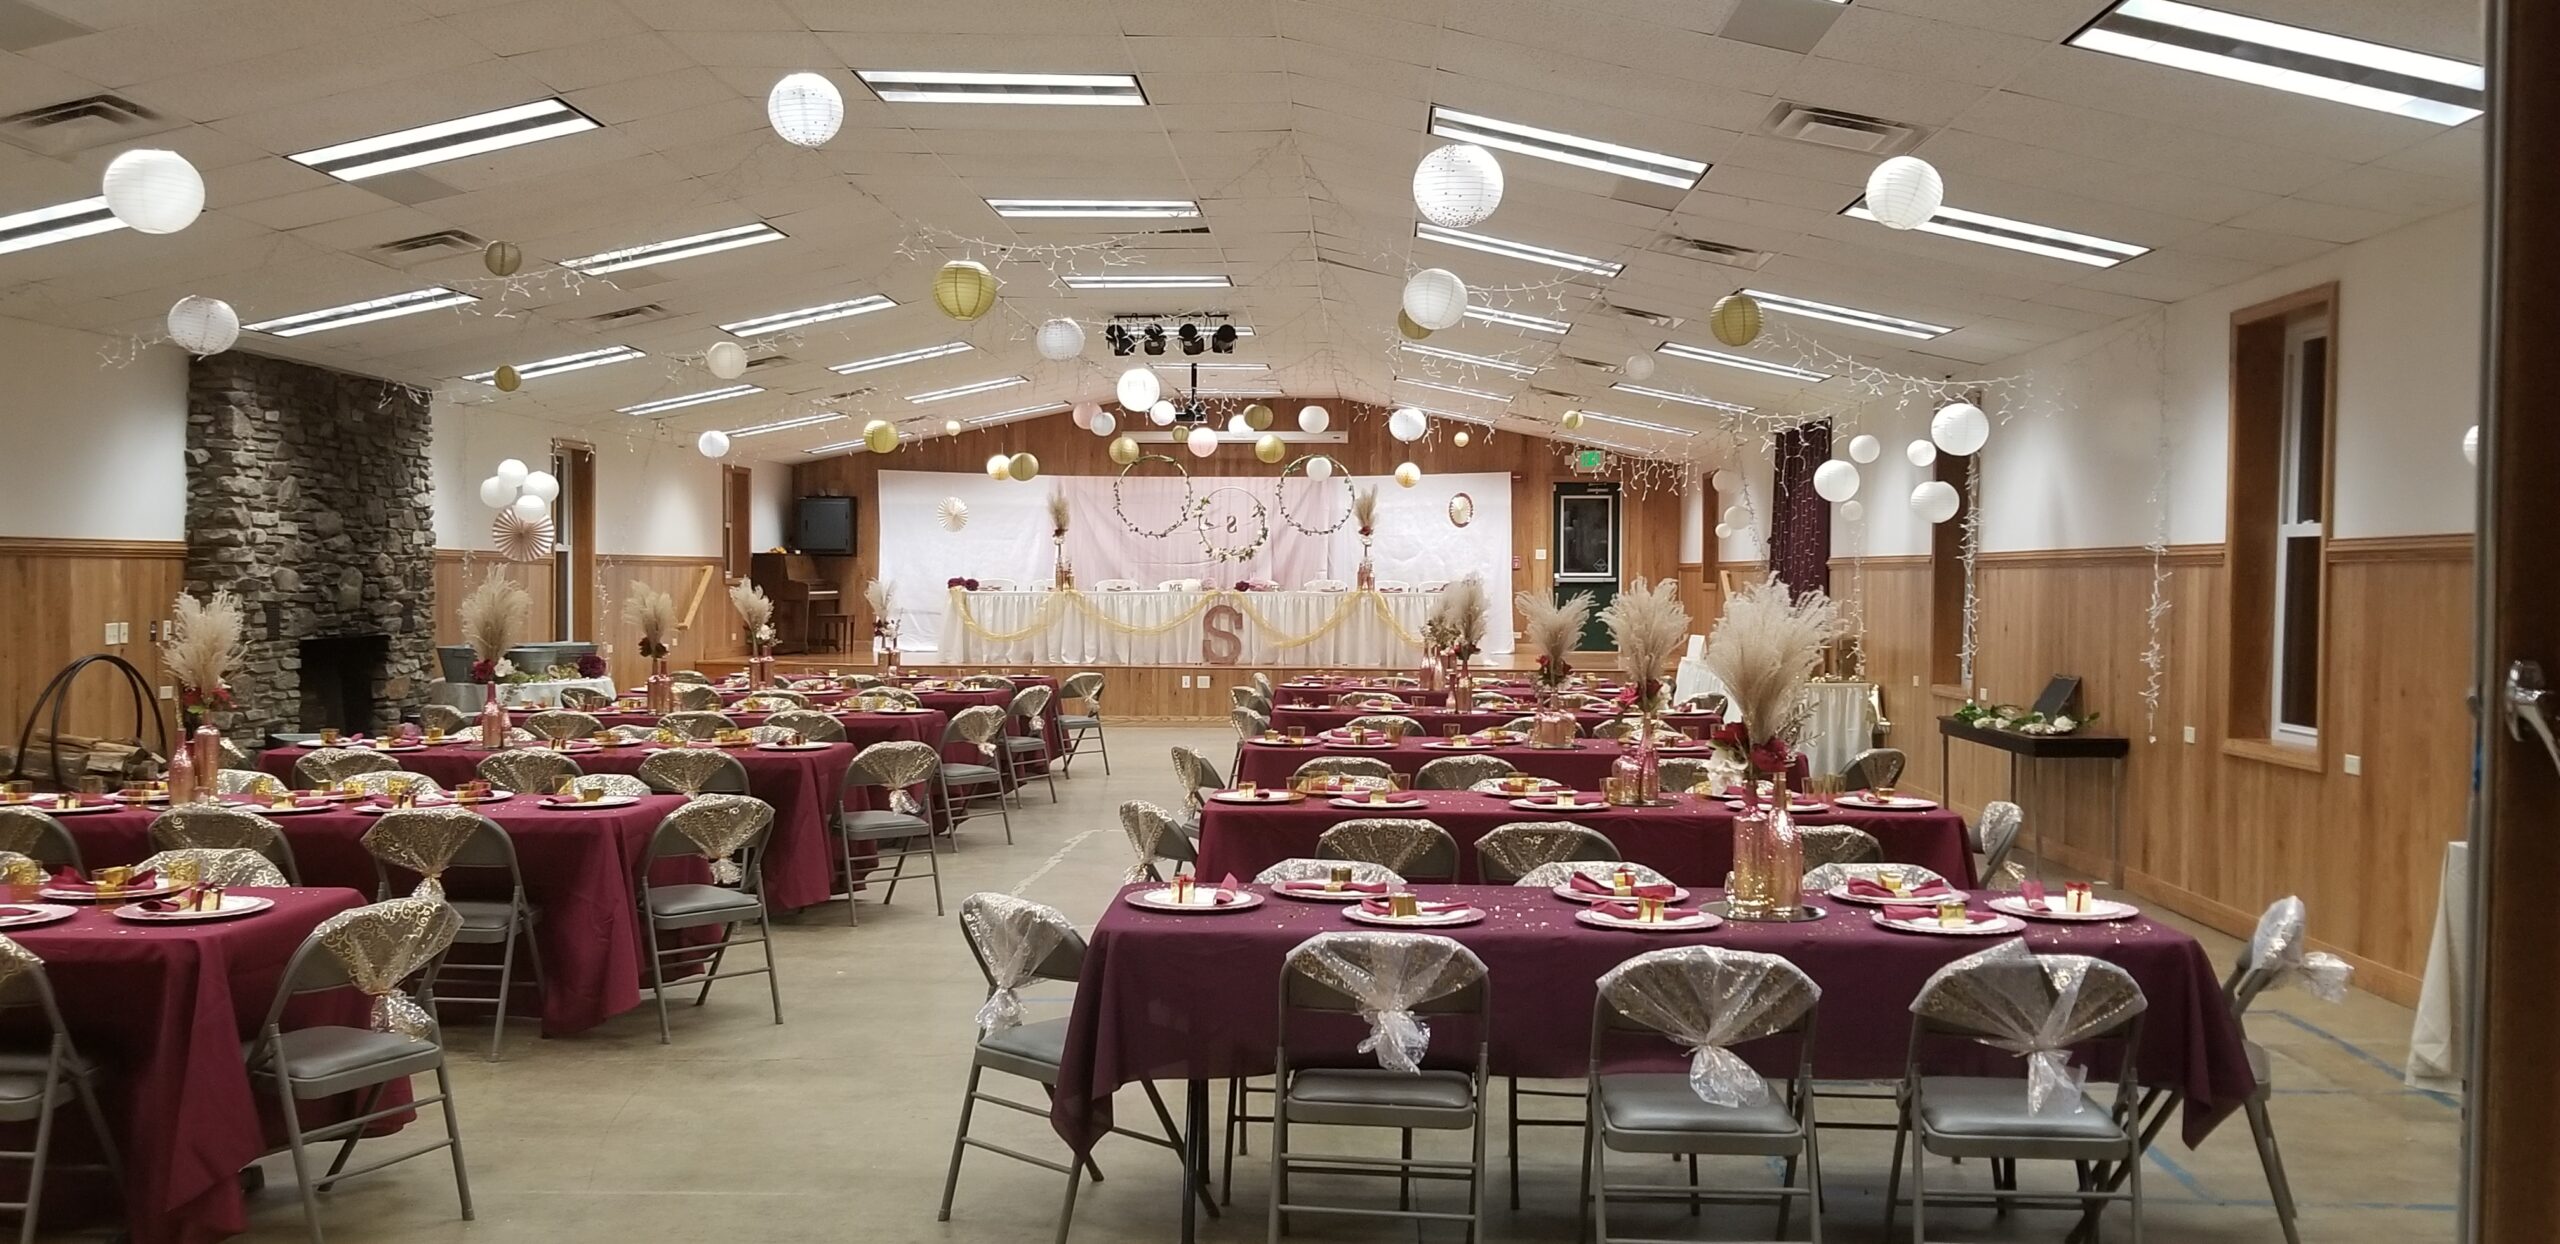 Rental facilities for parties and reunions in Randolph County, West Virginia